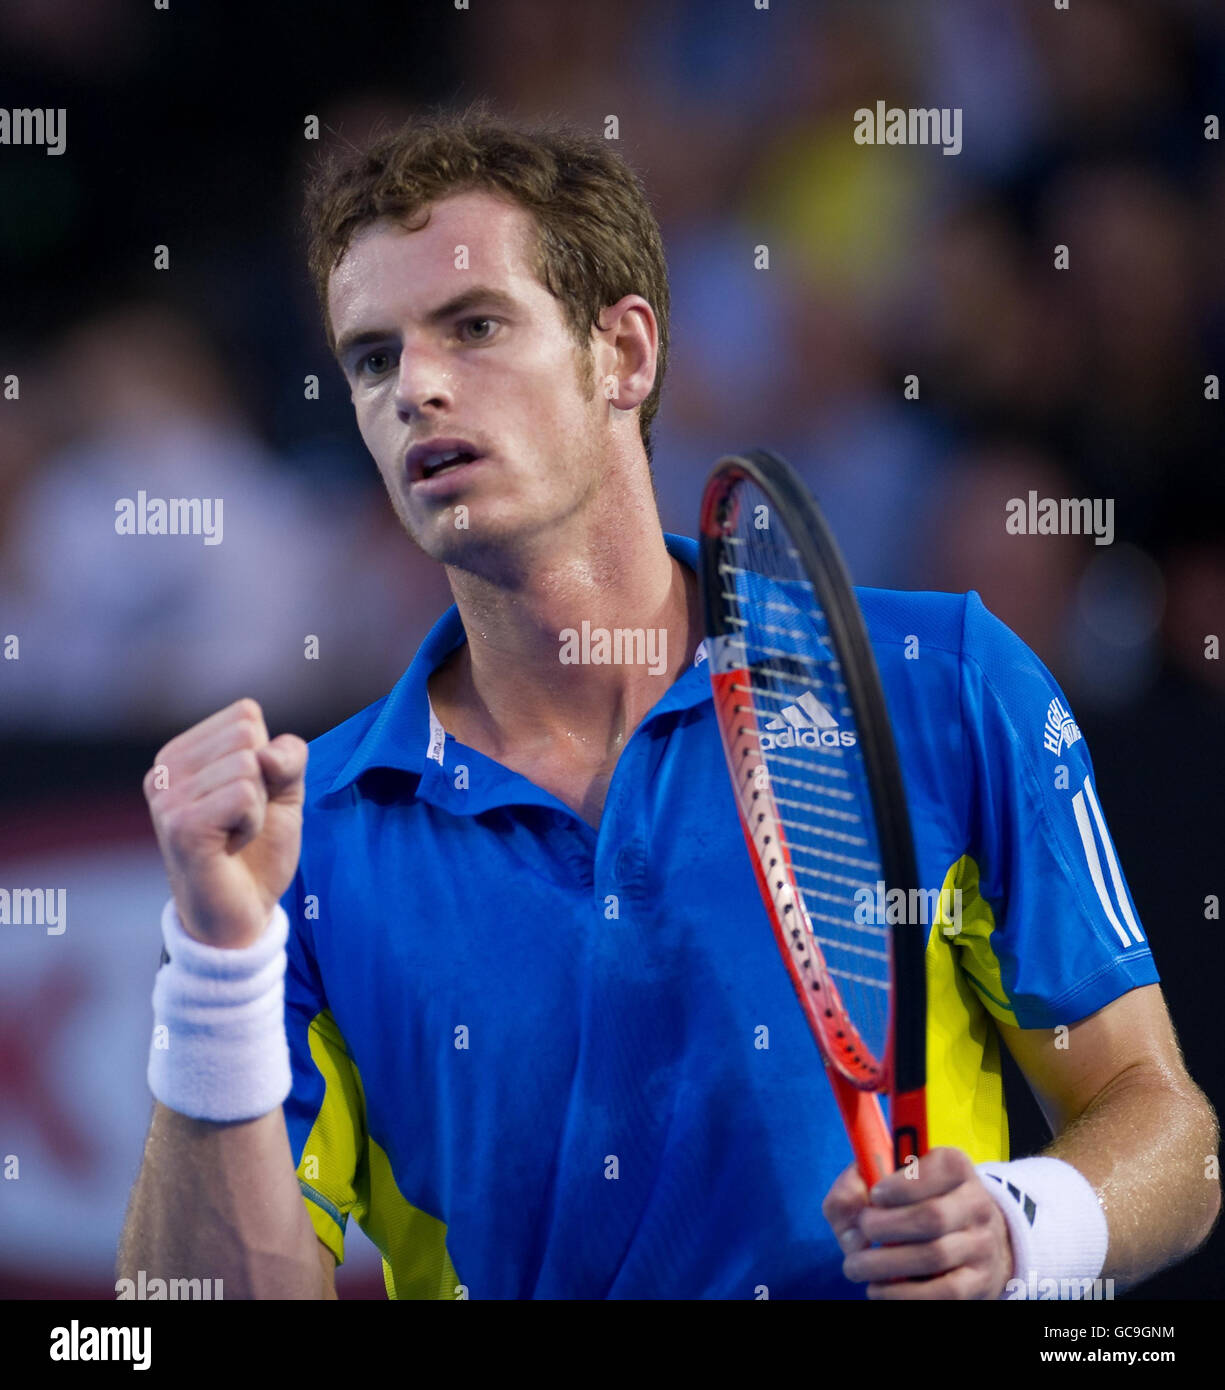 Great Britain's Andy Murray celebrates a point in his match against Switzerland's Roger Federer during the final of Australian Open at Melbourne Park, Melbourne Stock Photo - Alamy